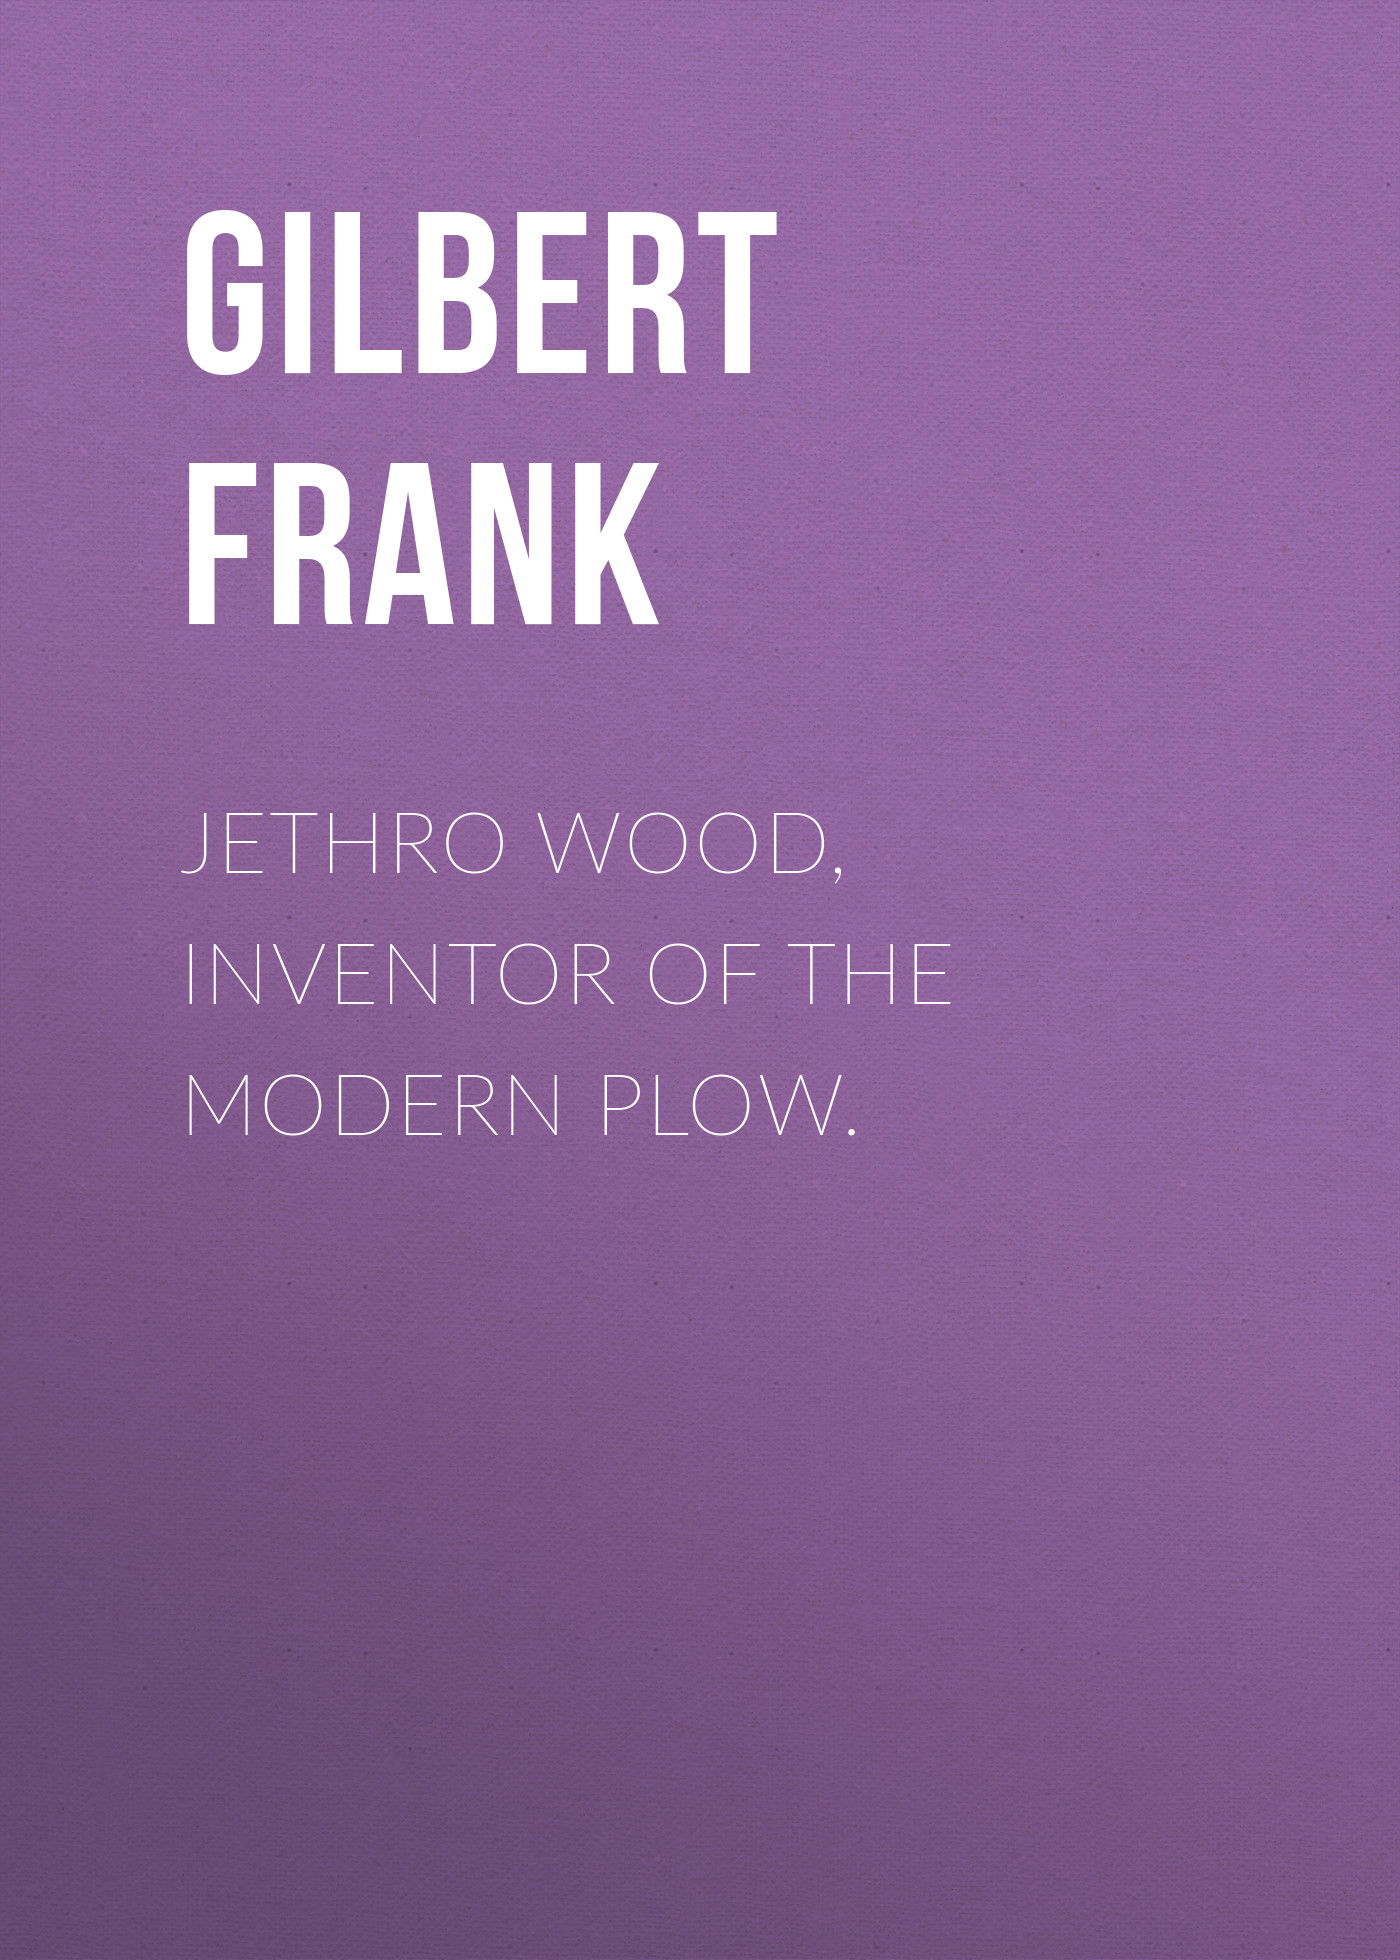 Jethro Wood, Inventor of the Modern Plow.